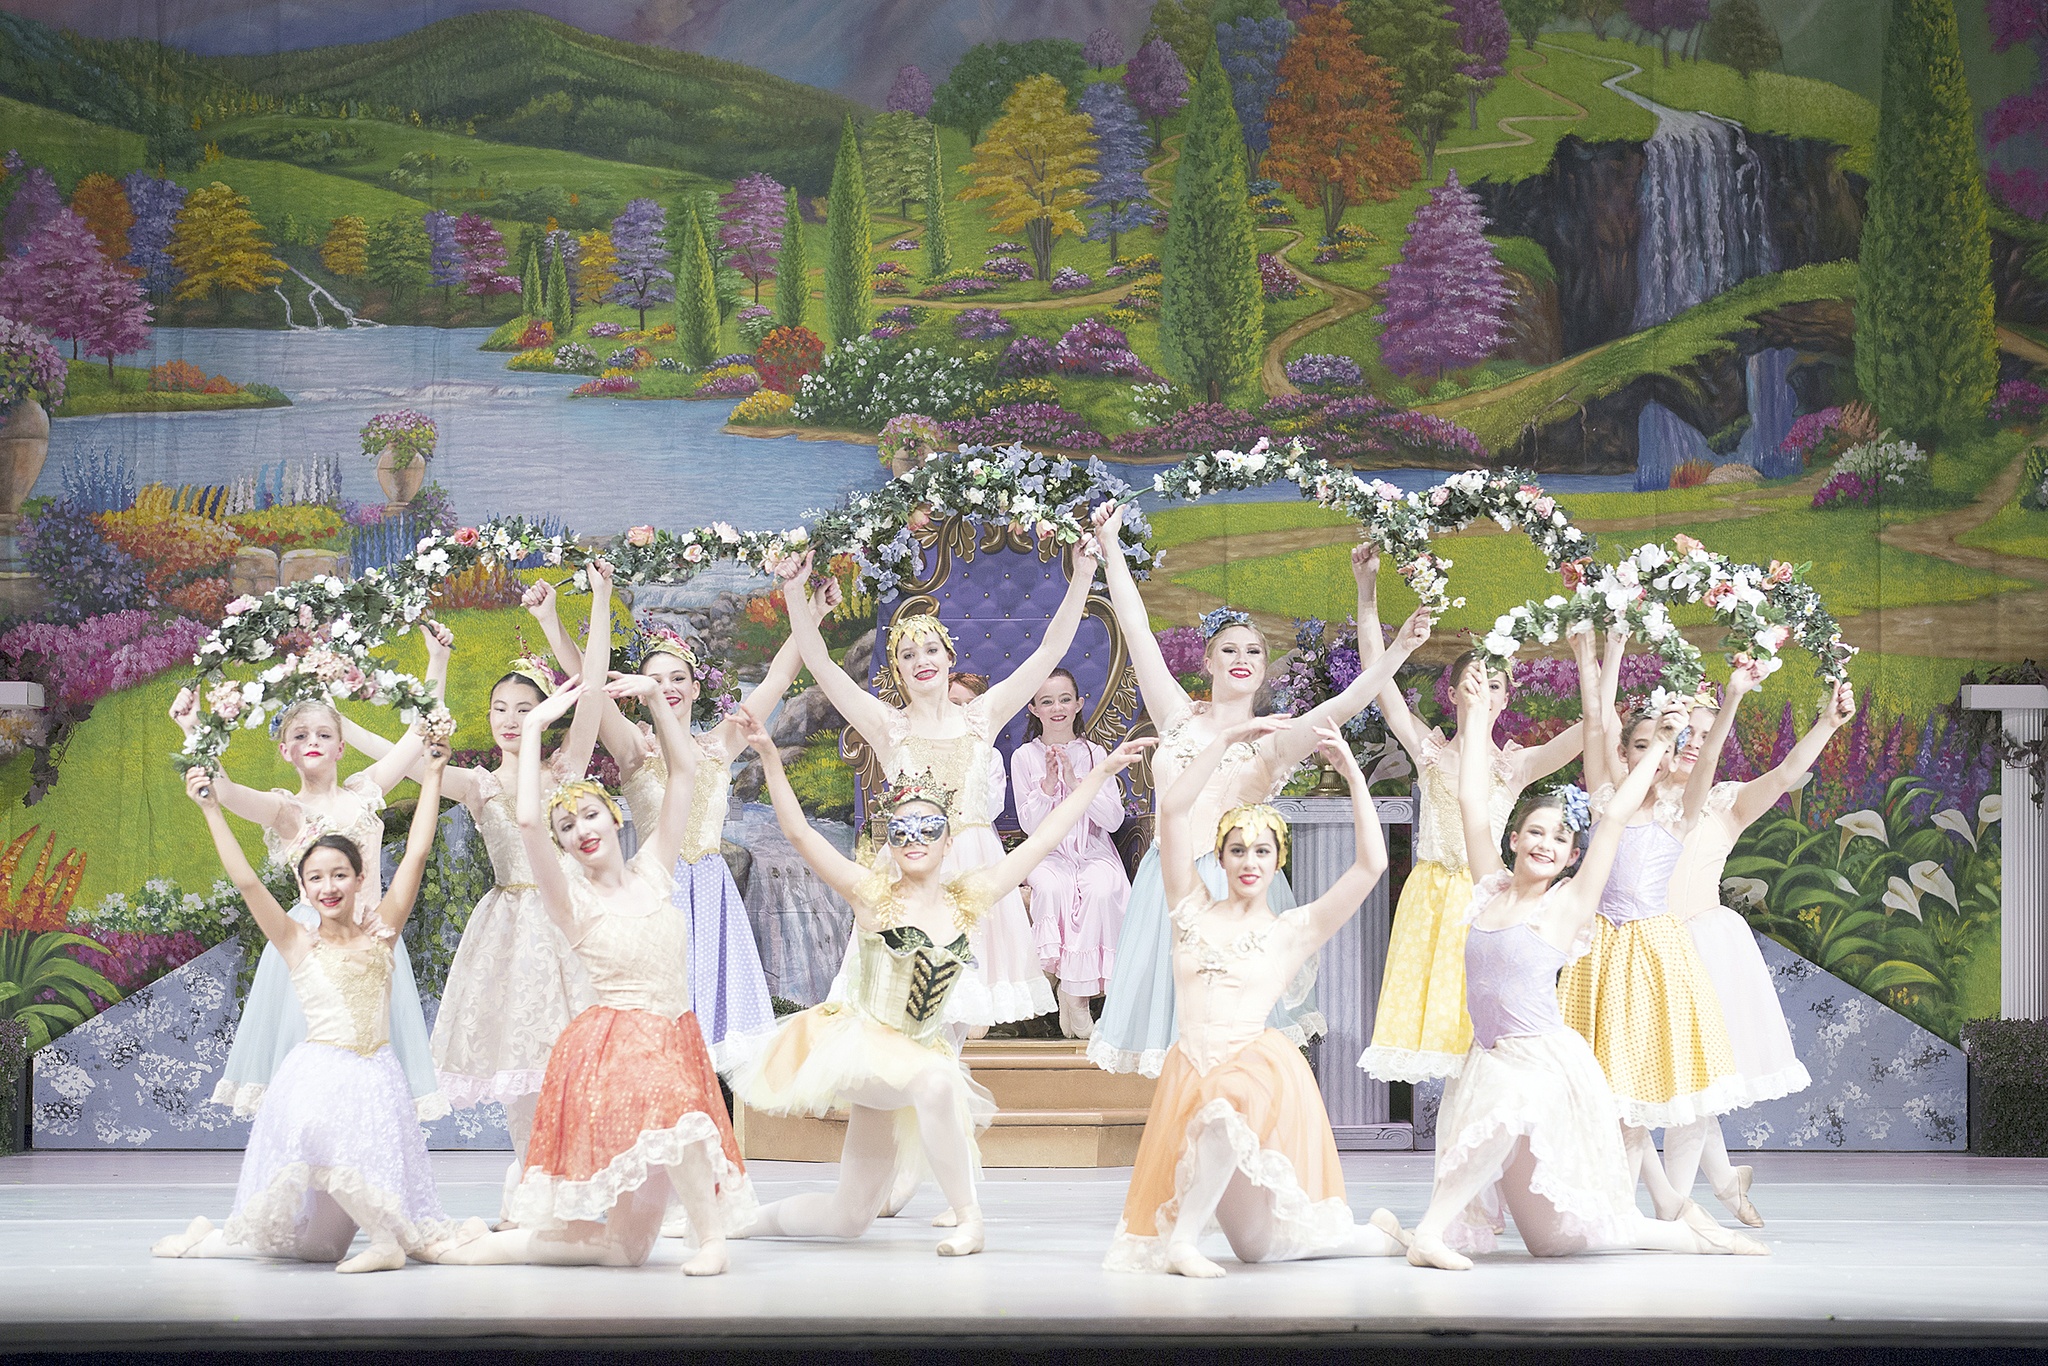 Ballet Workshop Productions will present “The Nutcracker” live at 7 p.m. Saturday and 
2 p.m. Sunday at the Port Angeles High School Performing Arts Center at 304 E. Park Ave. Seen here is the production from 2015.                                Melissa Chew